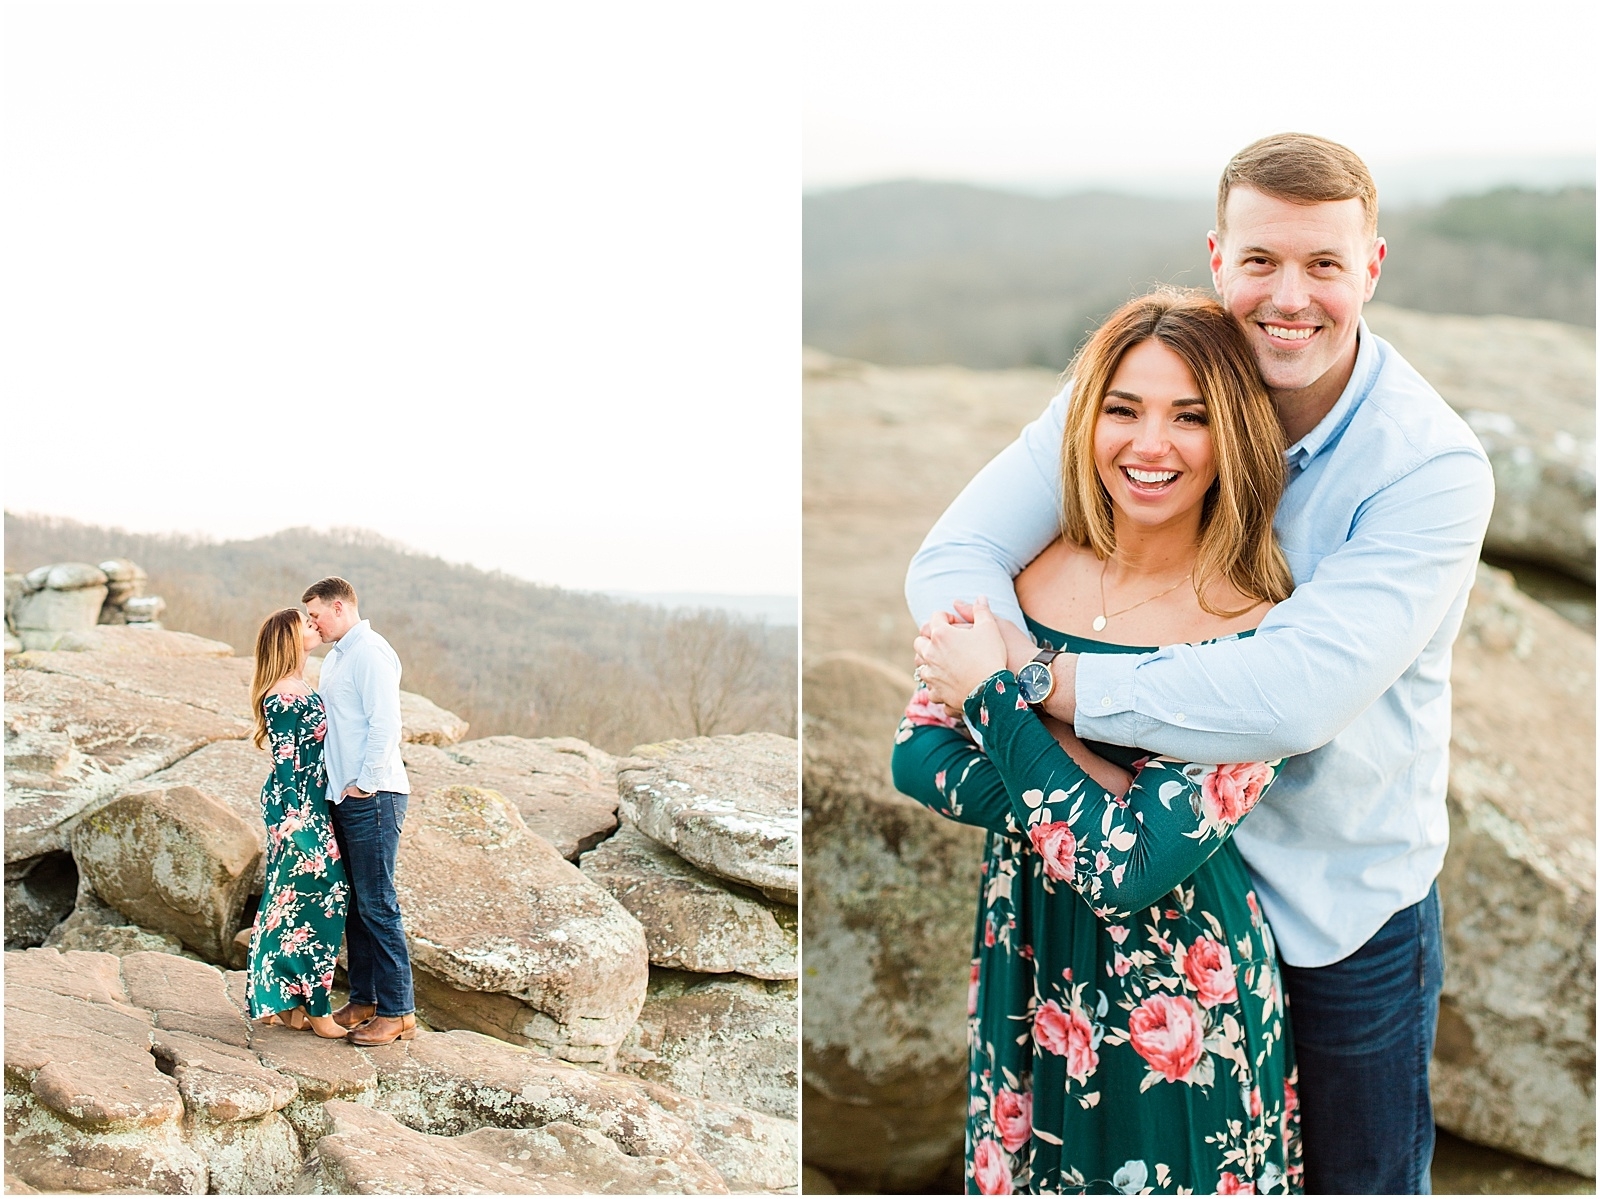 The Best of Engagement Sessions 2020 Recap0036.jpg